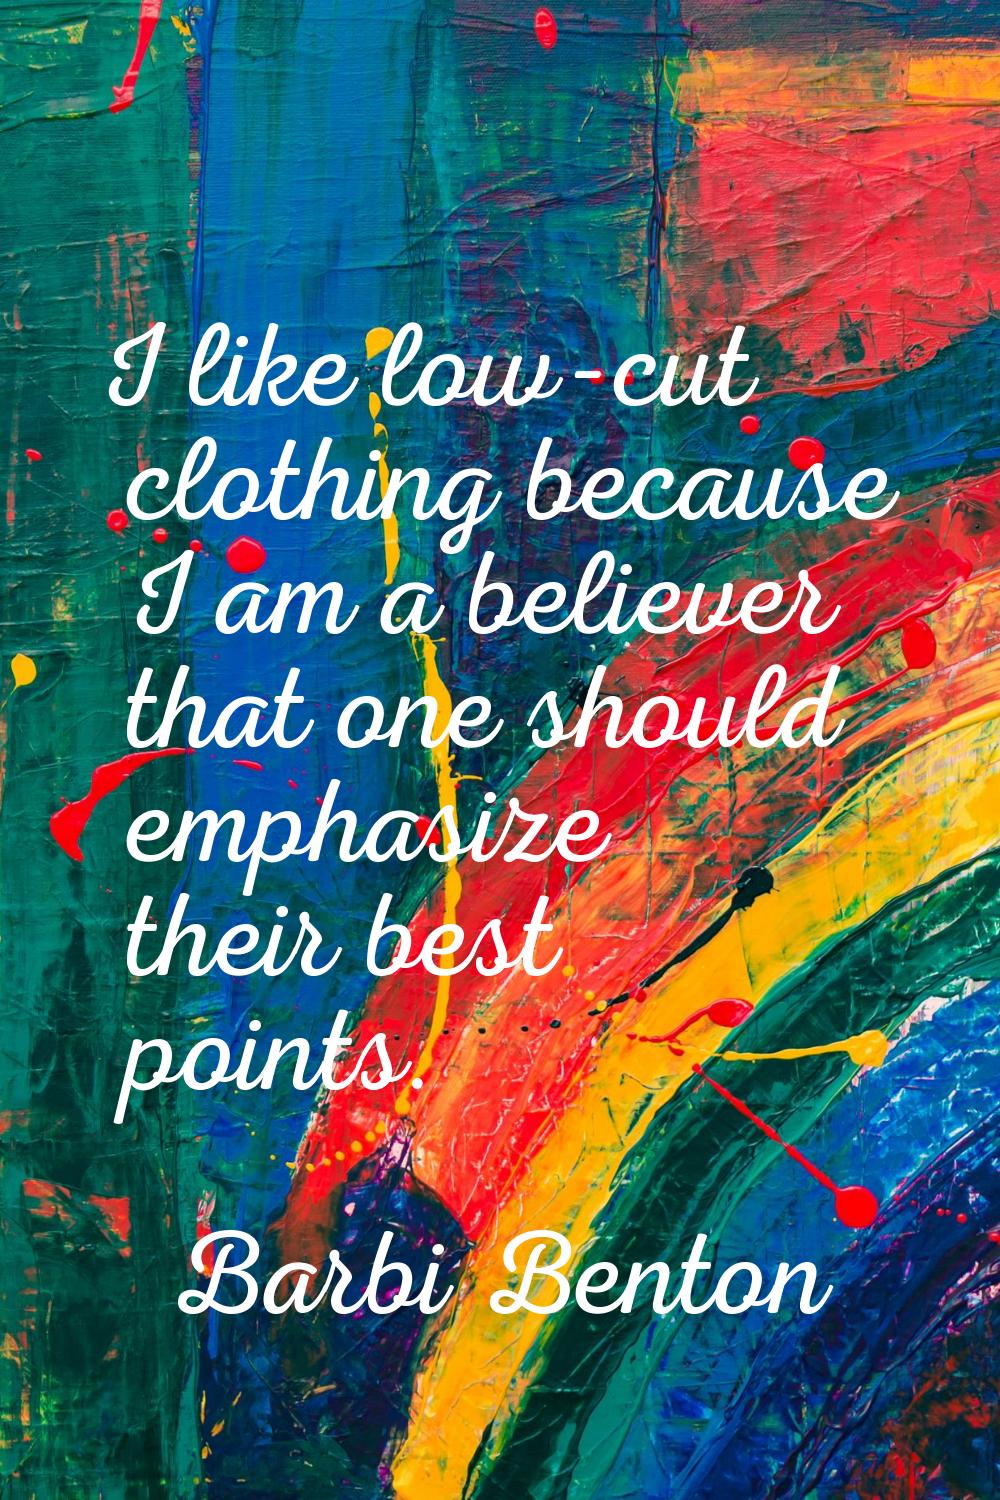 I like low-cut clothing because I am a believer that one should emphasize their best points.